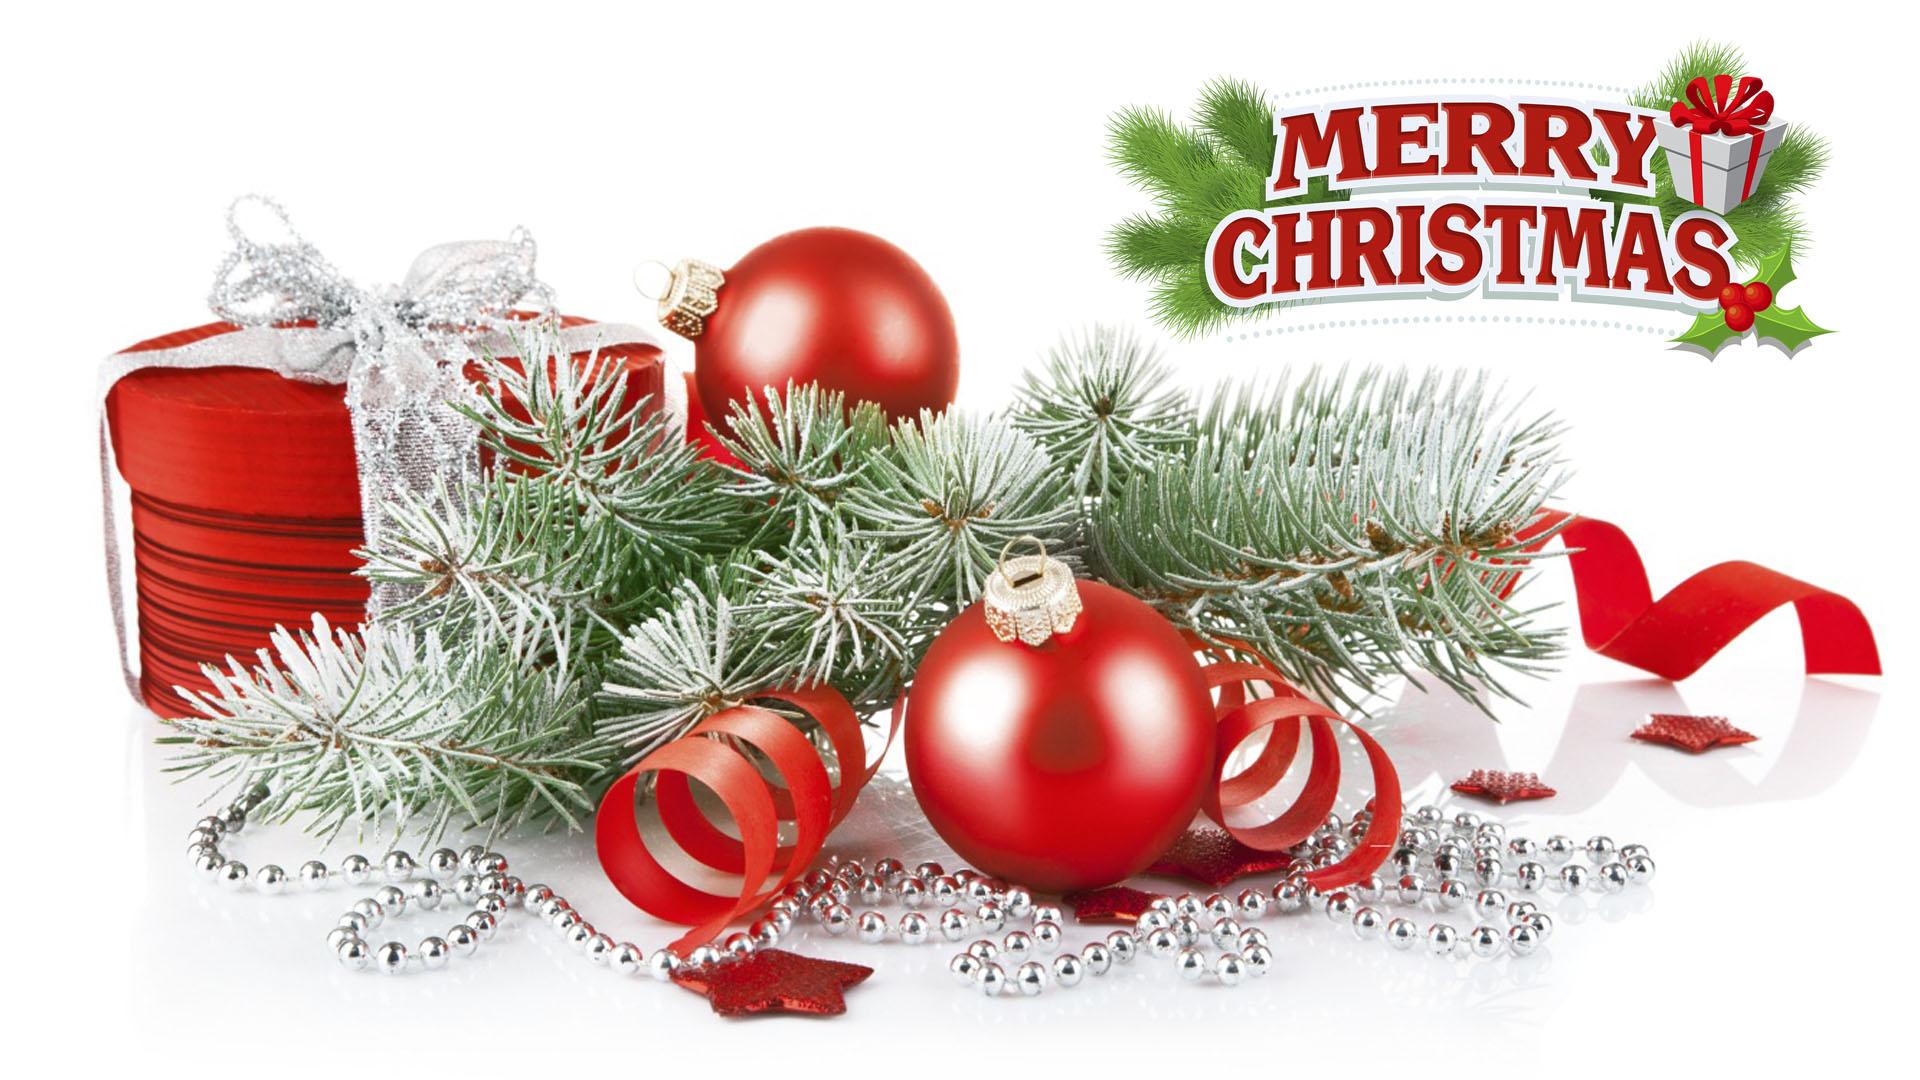 Merry Christmas Greeting Card 2020 Android Wallpaper